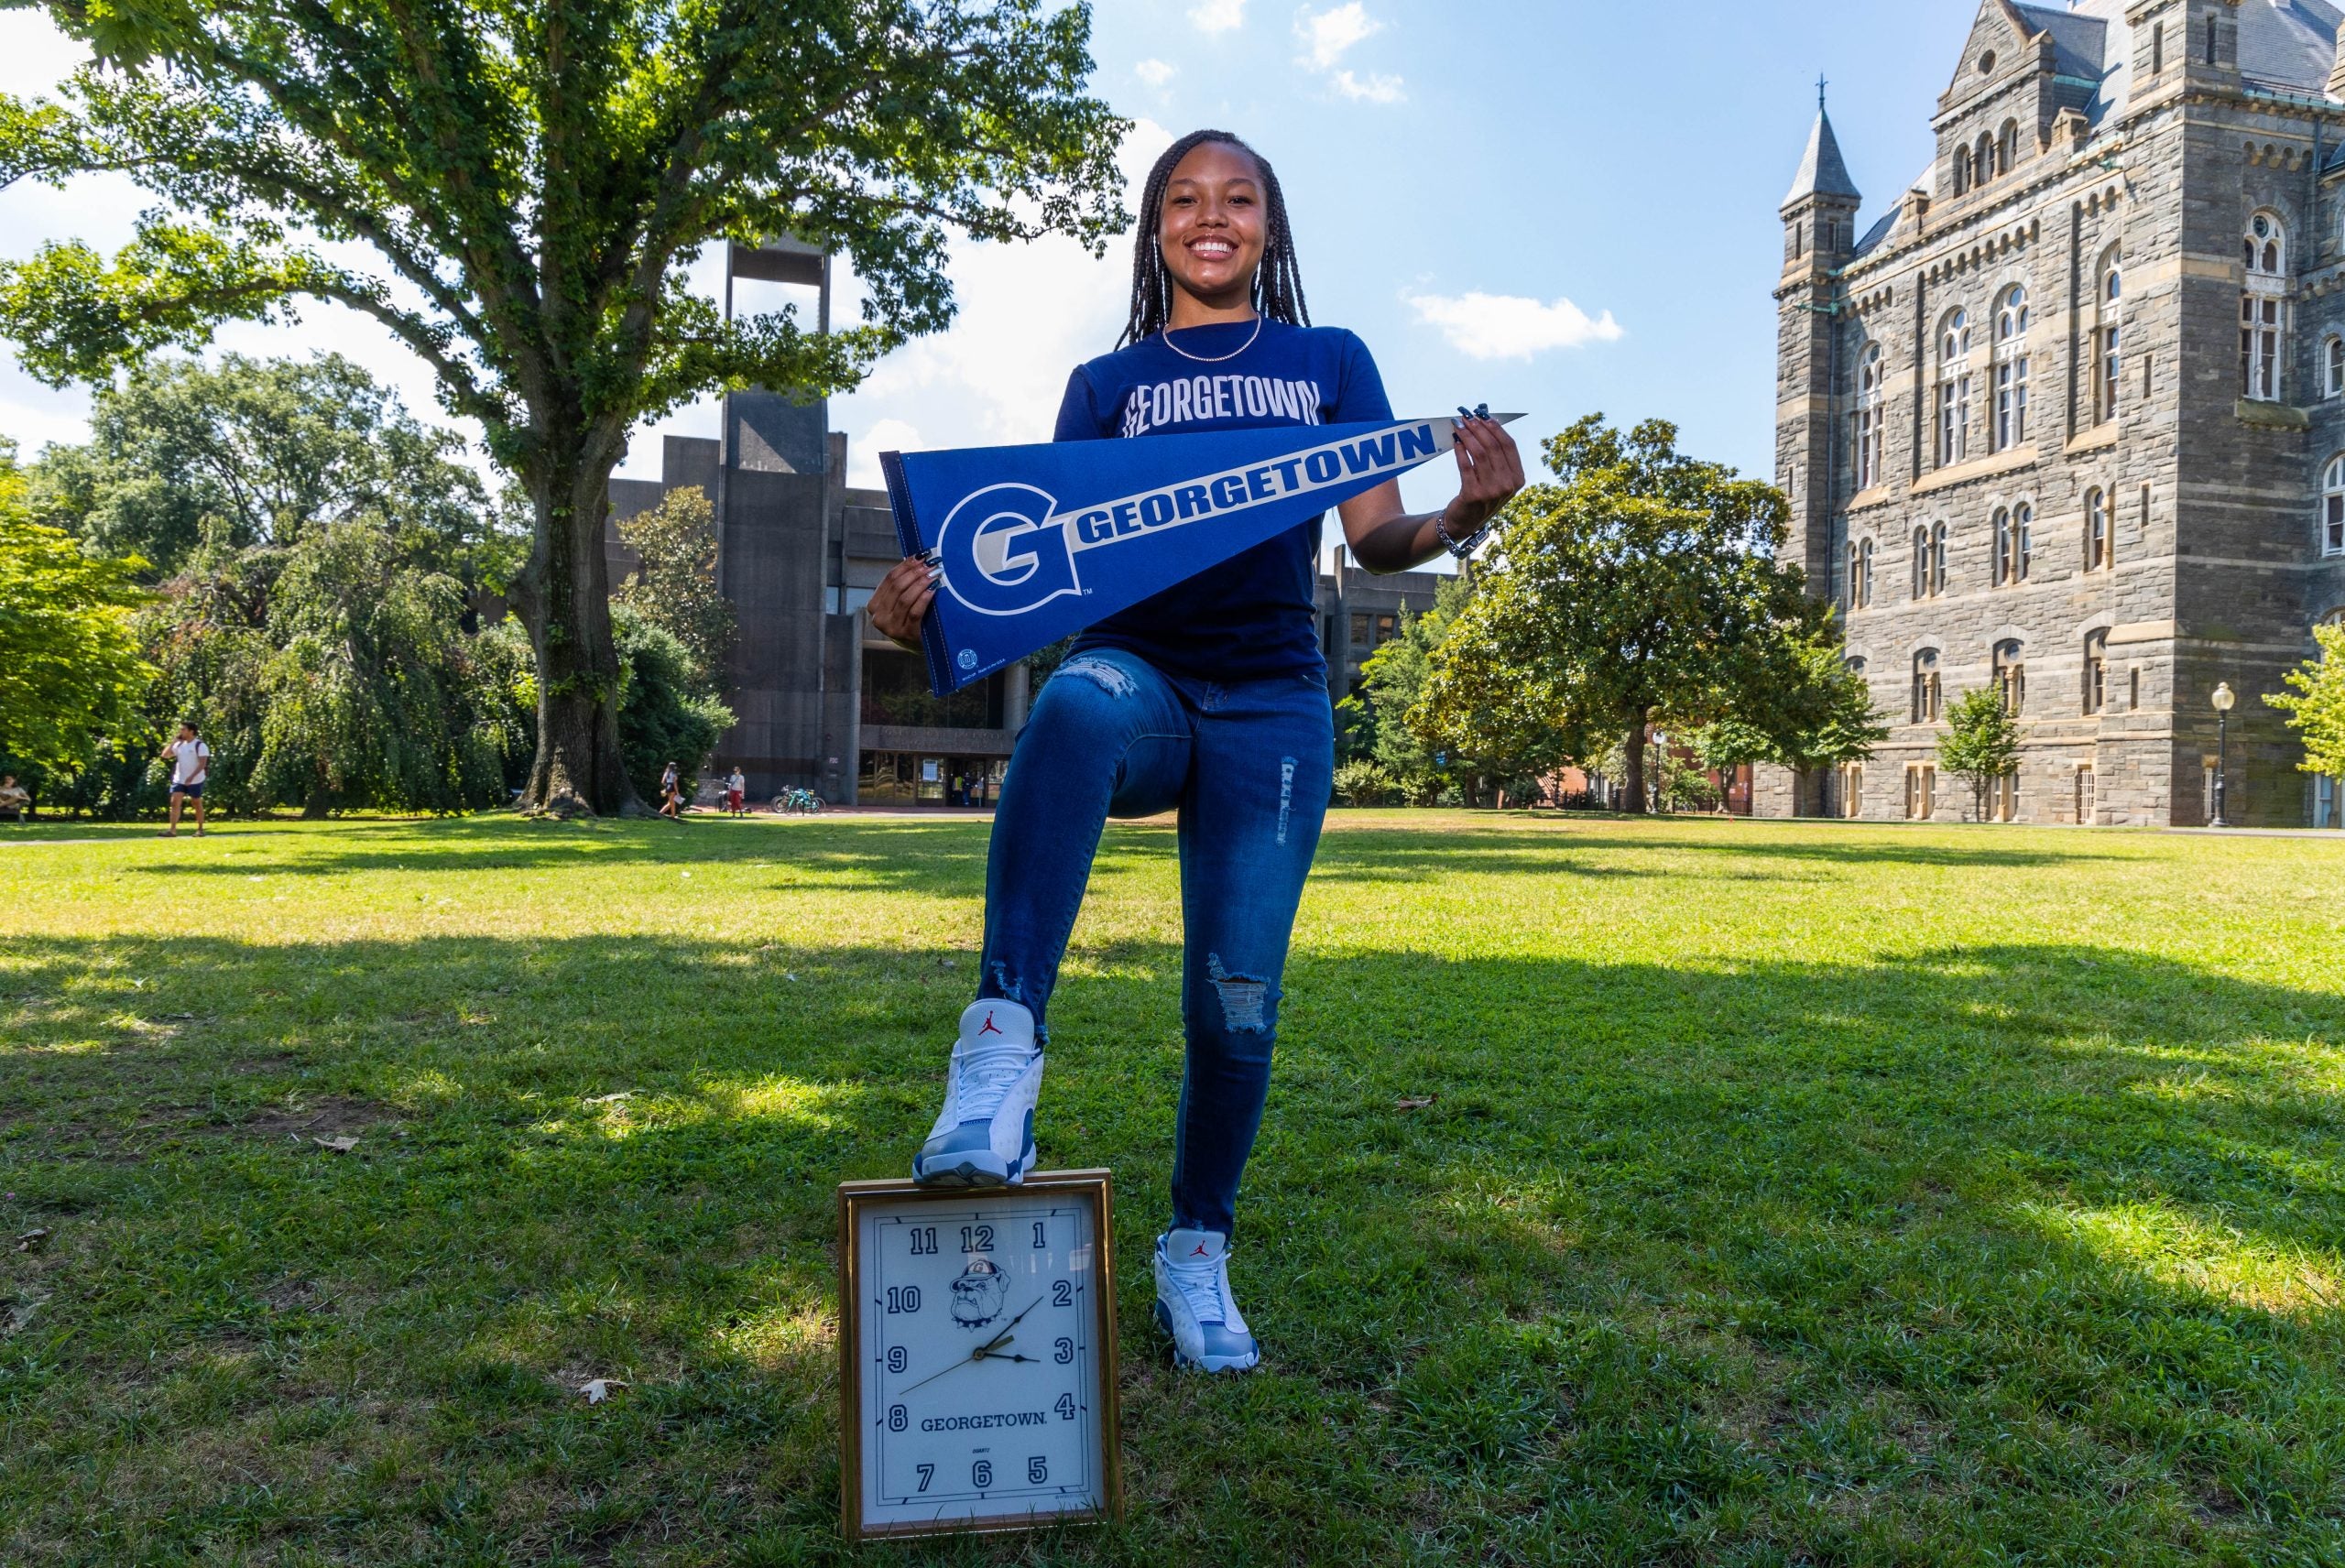 Young woman wearing a blue Georgetown T-shirt holds a blue Georgetown pennant and puts her foot on a small clock in the grass